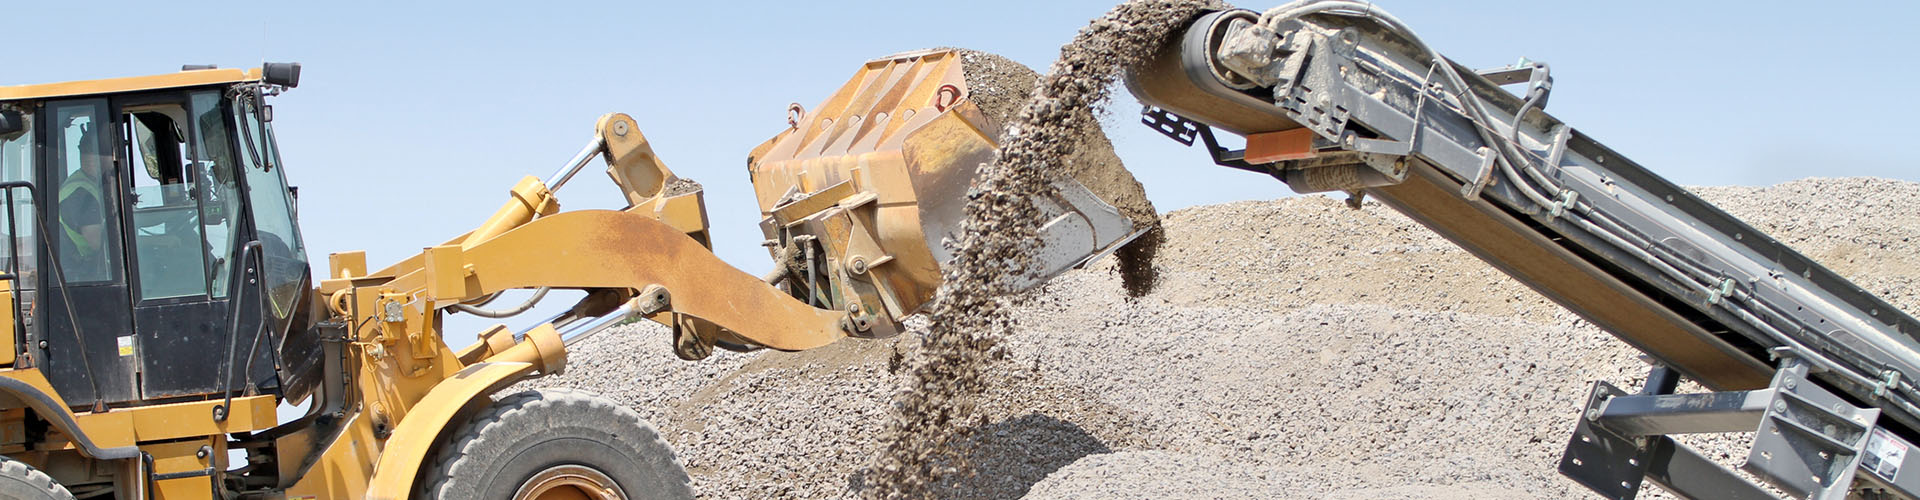 rock crusher on construction site